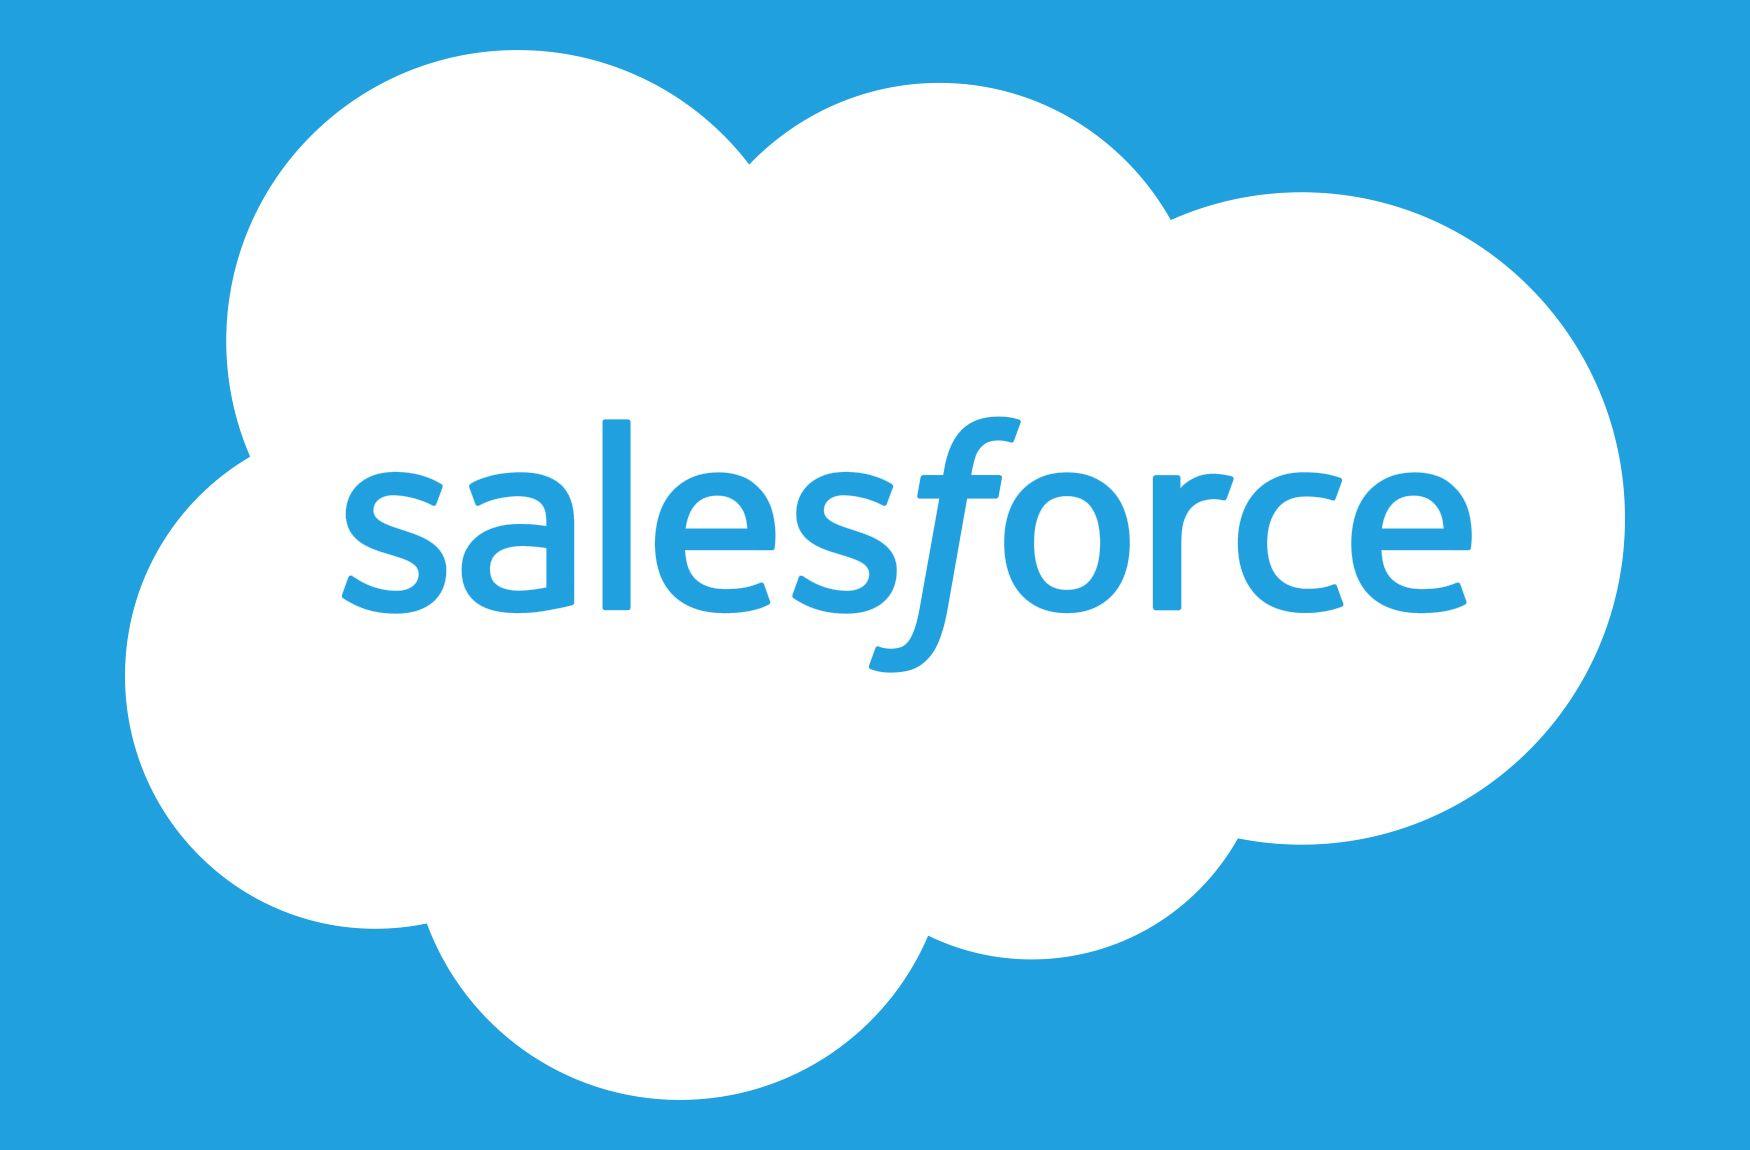 Salesforce Logo - Salesforce Logo, Salesforce Symbol, Meaning, History and Evolution